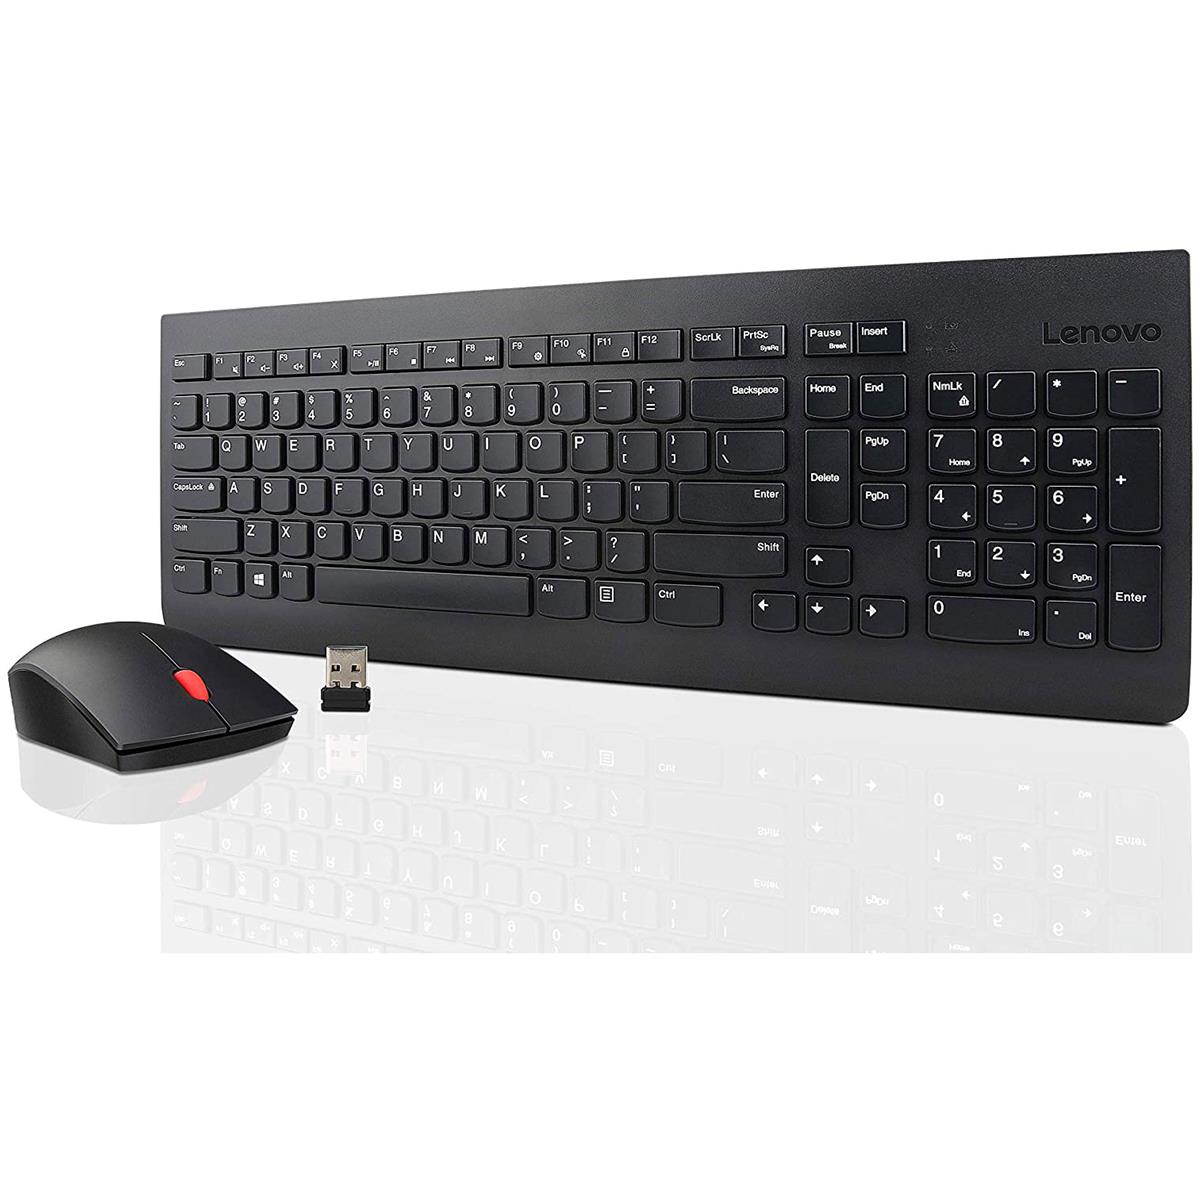 Image of Lenovo 510 Wireless Keyboard and Mouse Combo